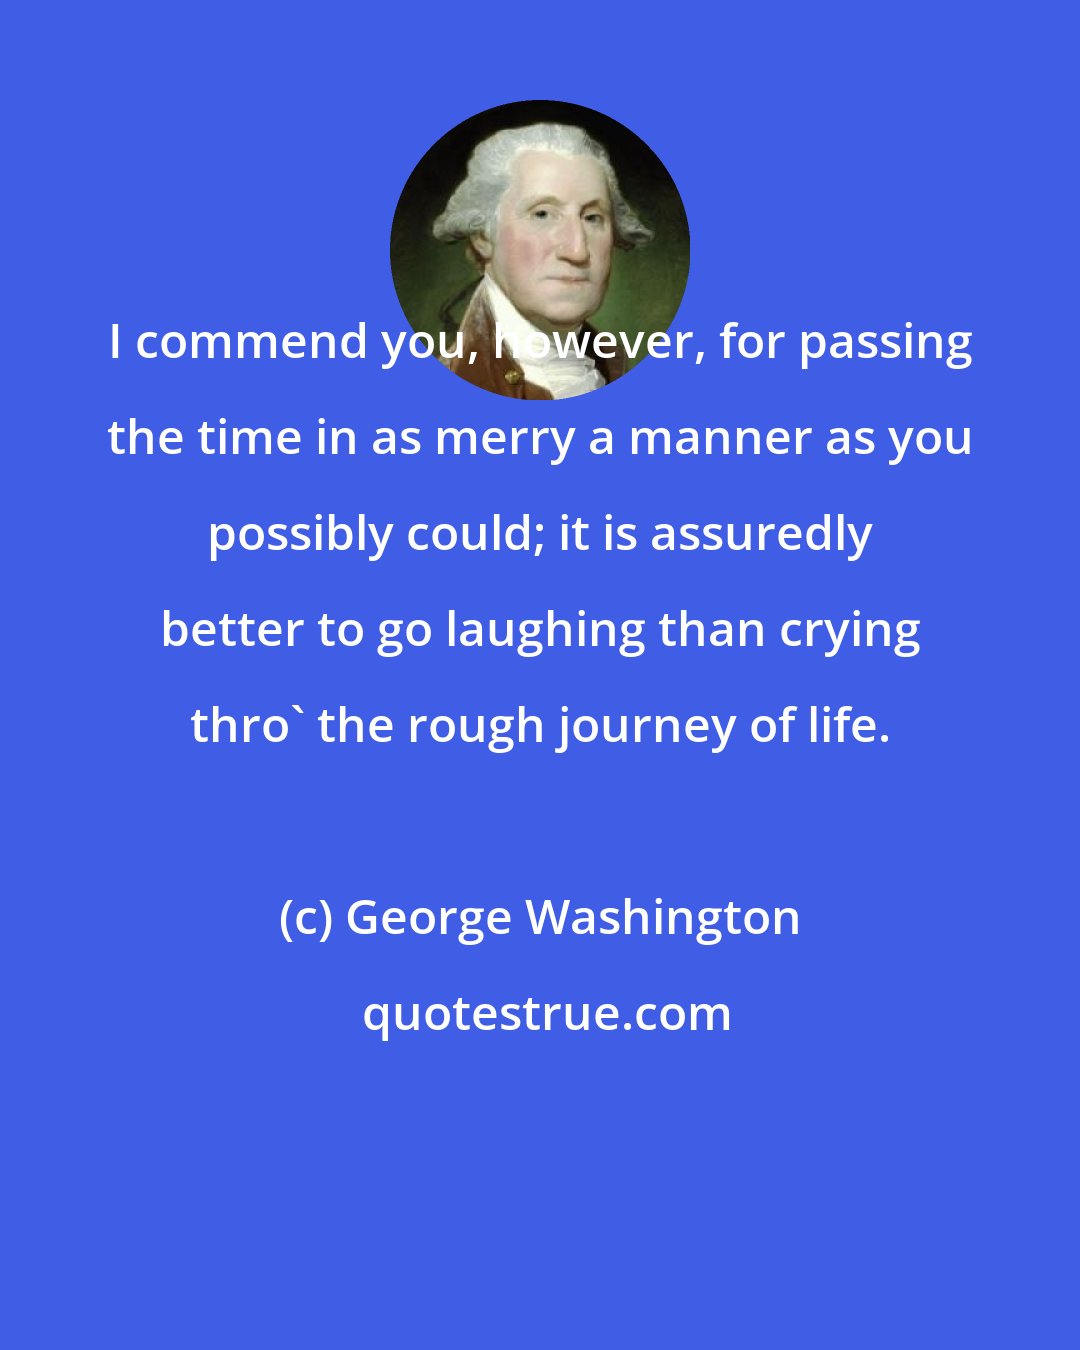 George Washington: I commend you, however, for passing the time in as merry a manner as you possibly could; it is assuredly better to go laughing than crying thro' the rough journey of life.